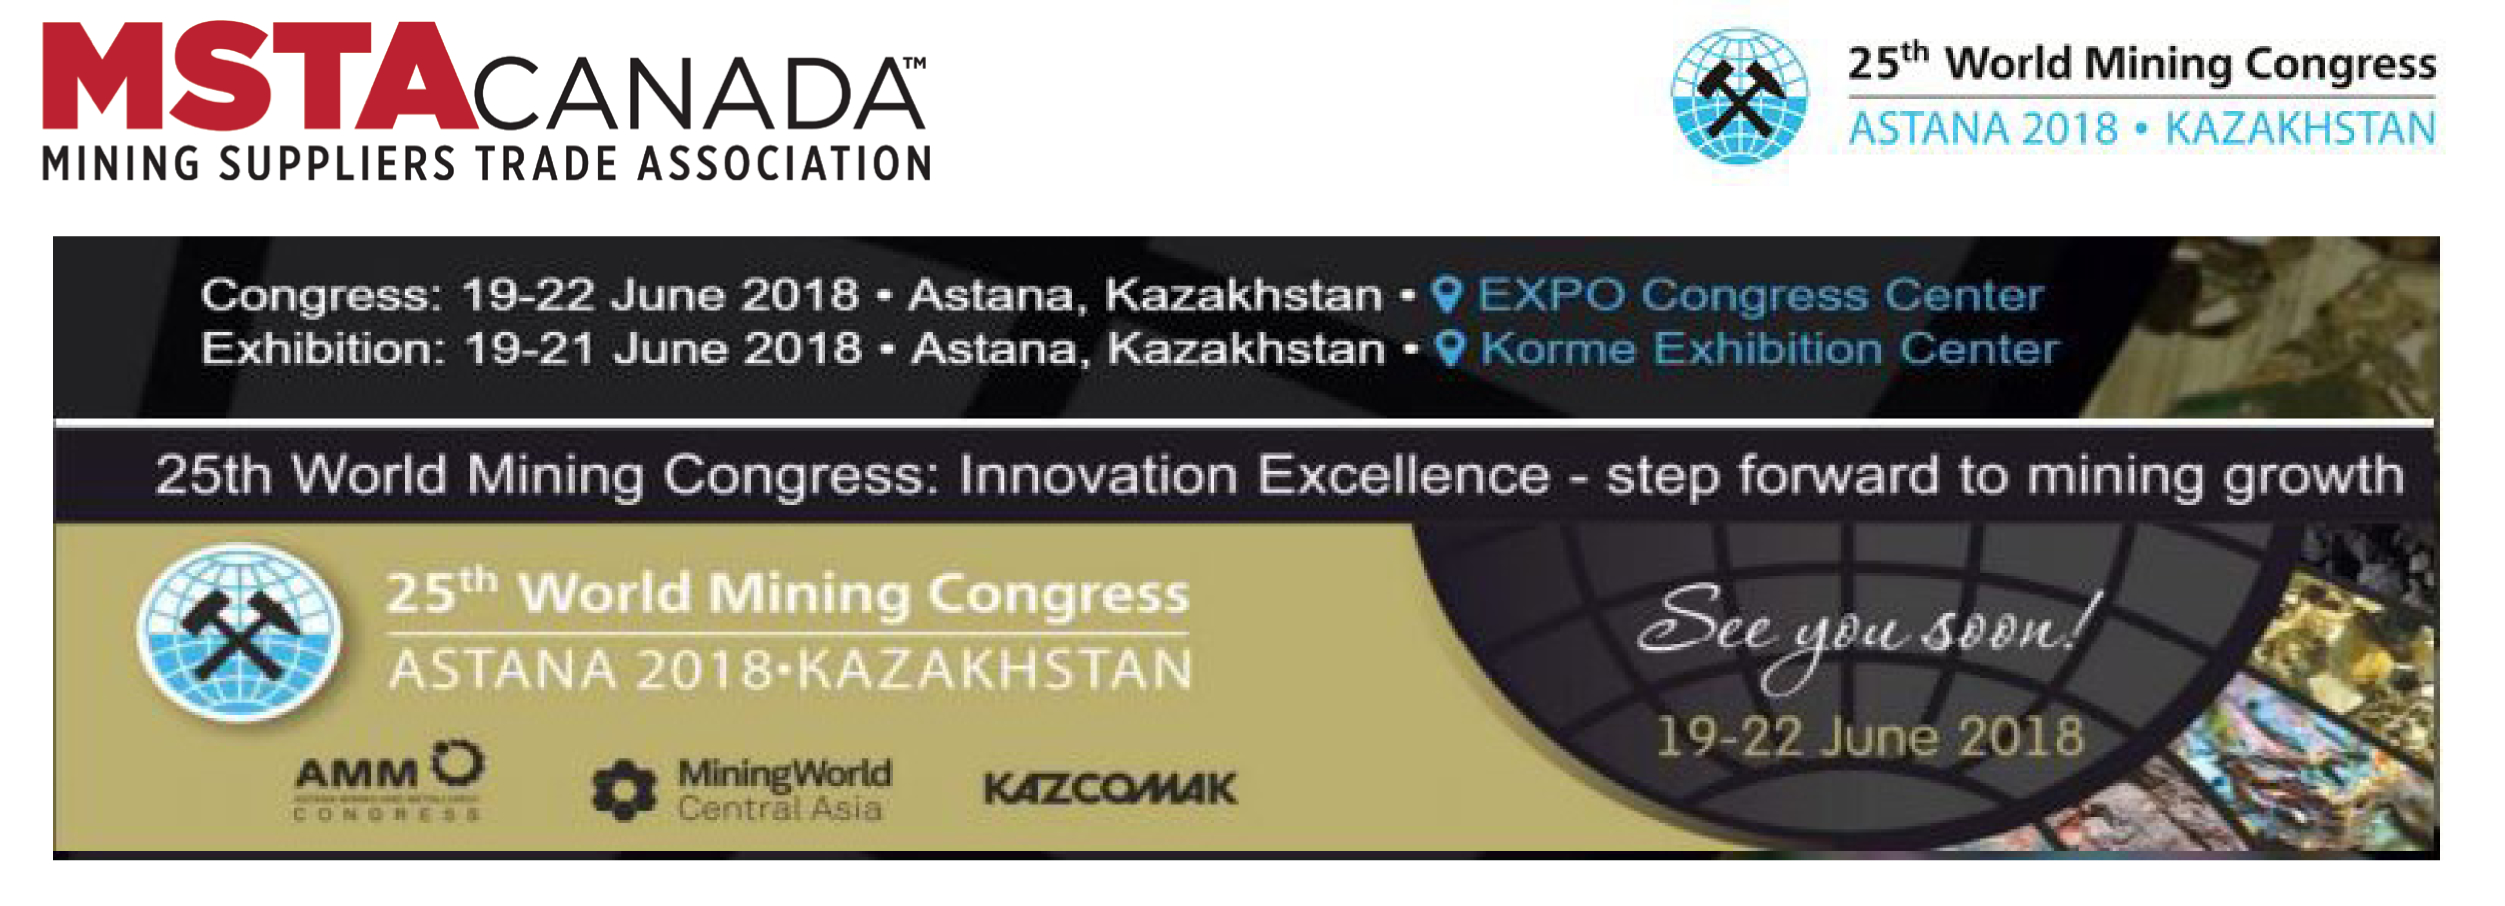 Mining World Central Asia 2018